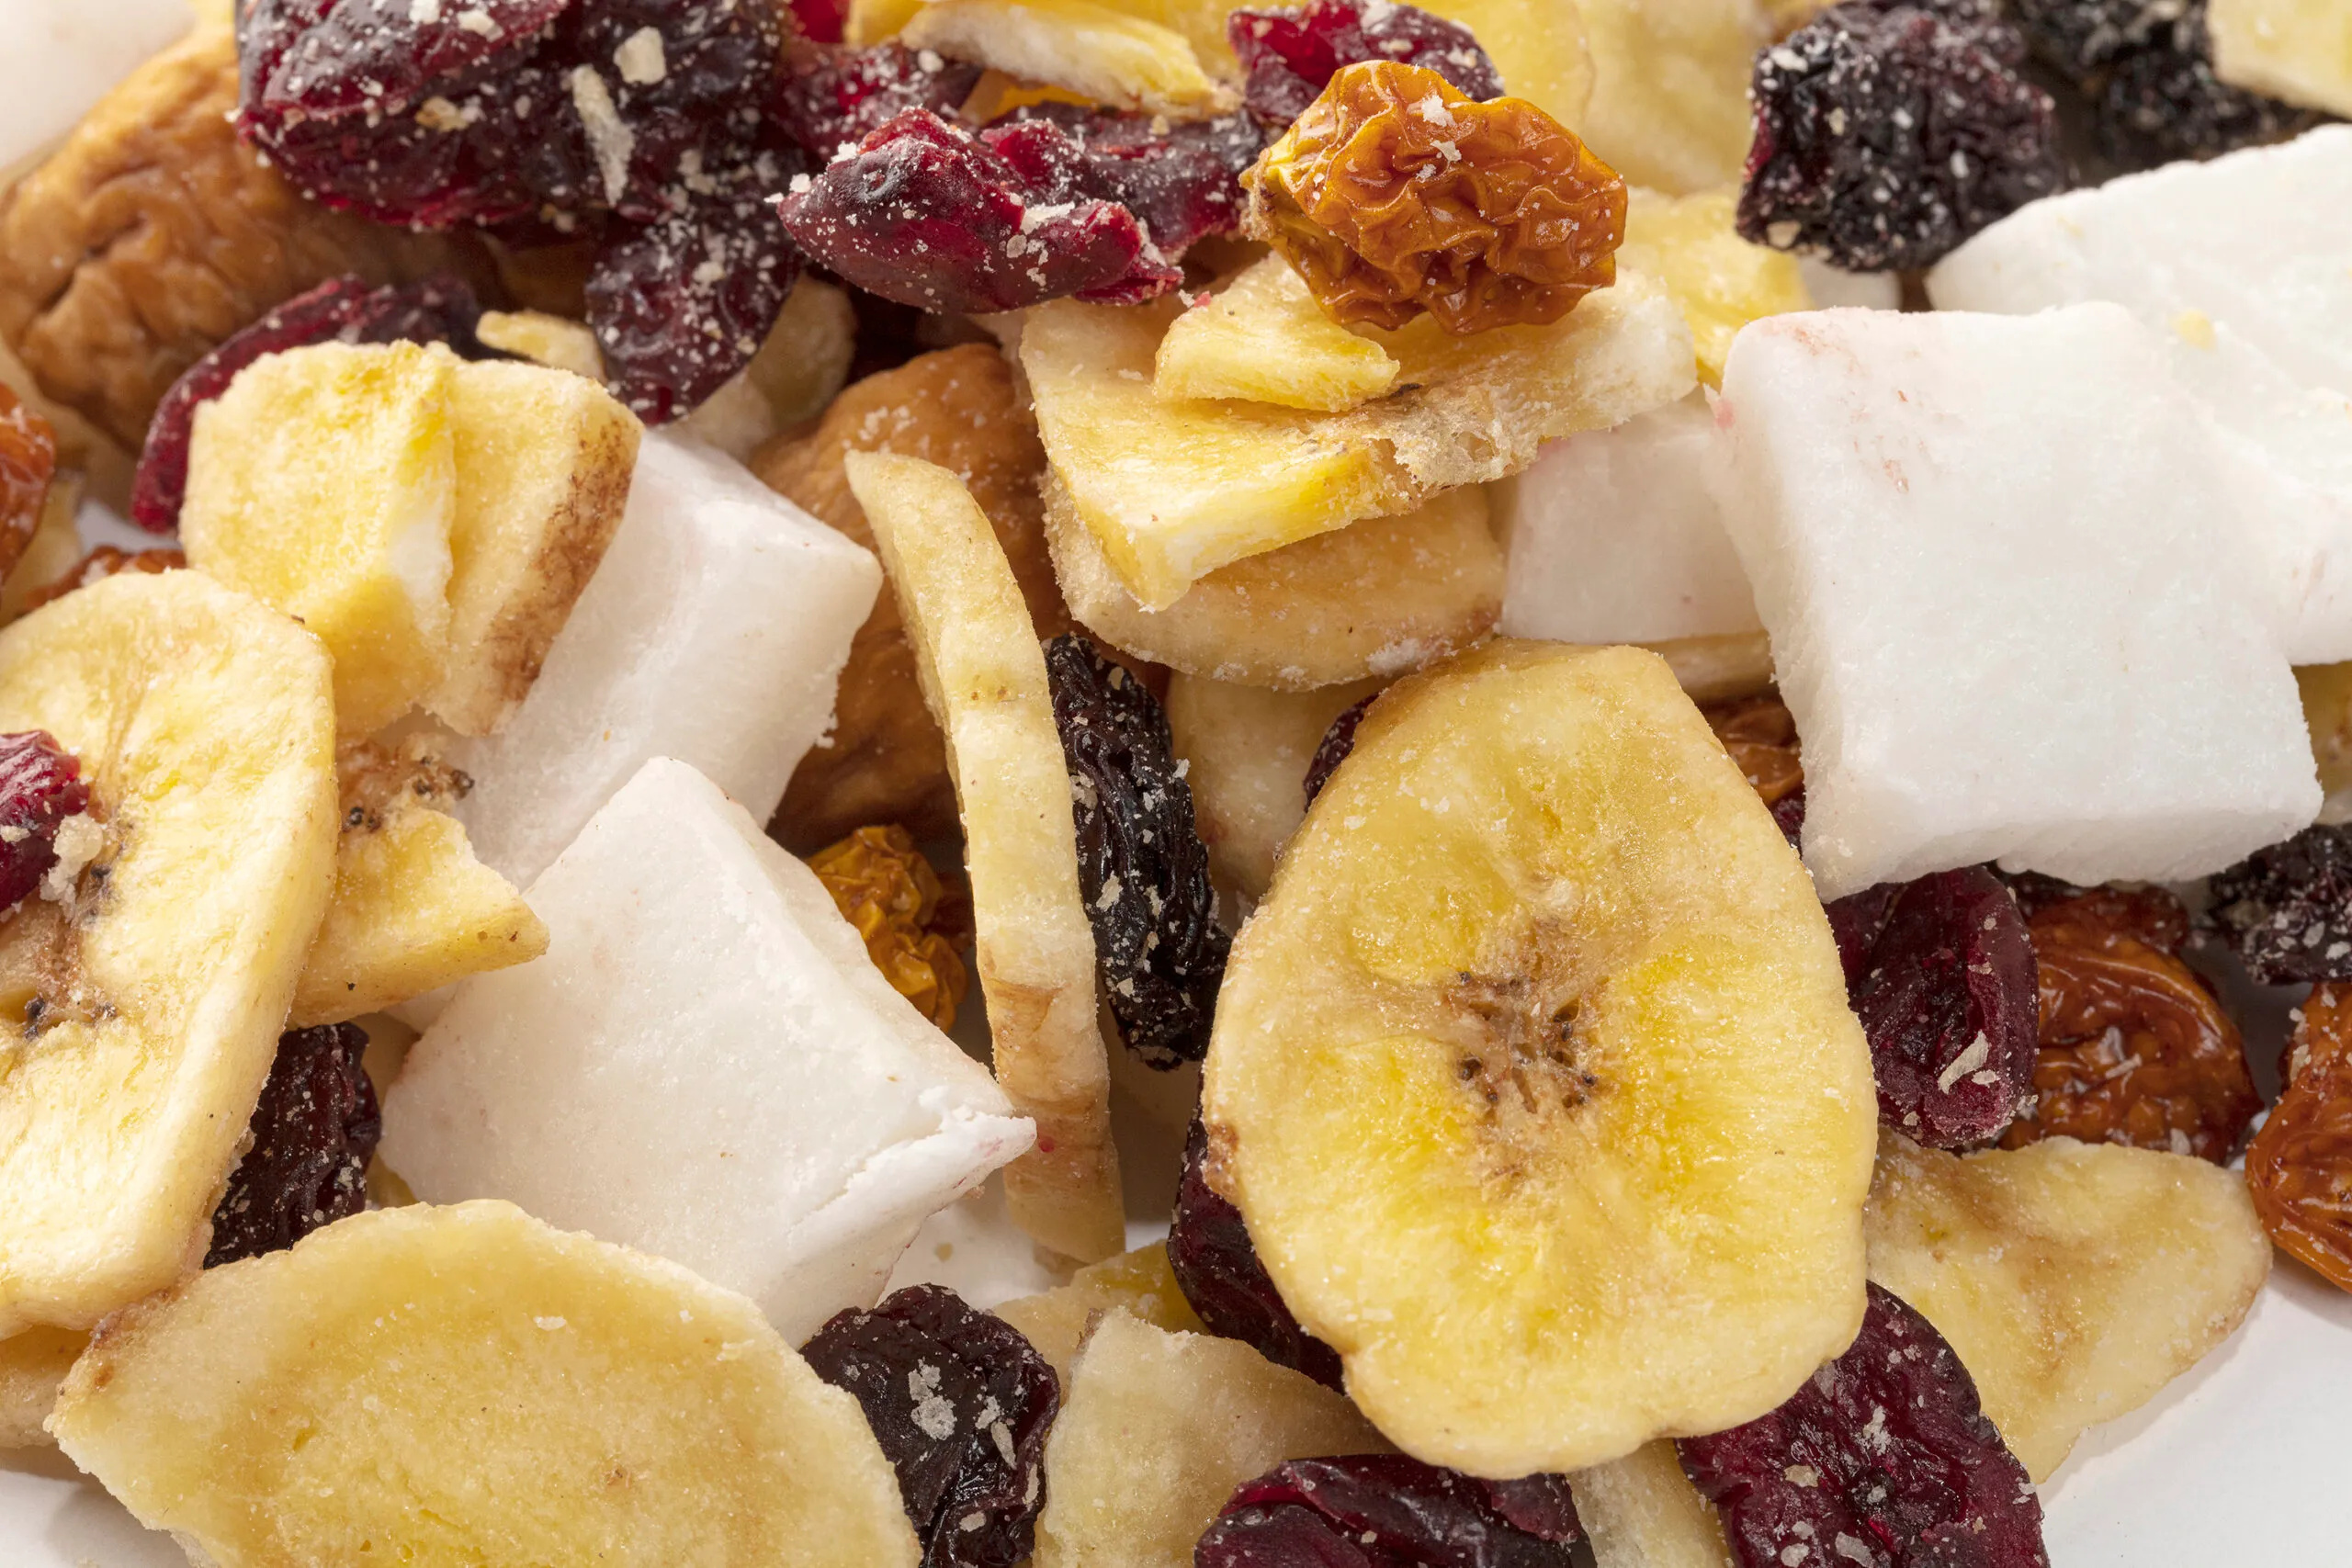 Dried Fruits: Dehydrated bananas, Used as a topping for cereal, yogurt, or oatmeal. 2560x1710 HD Background.